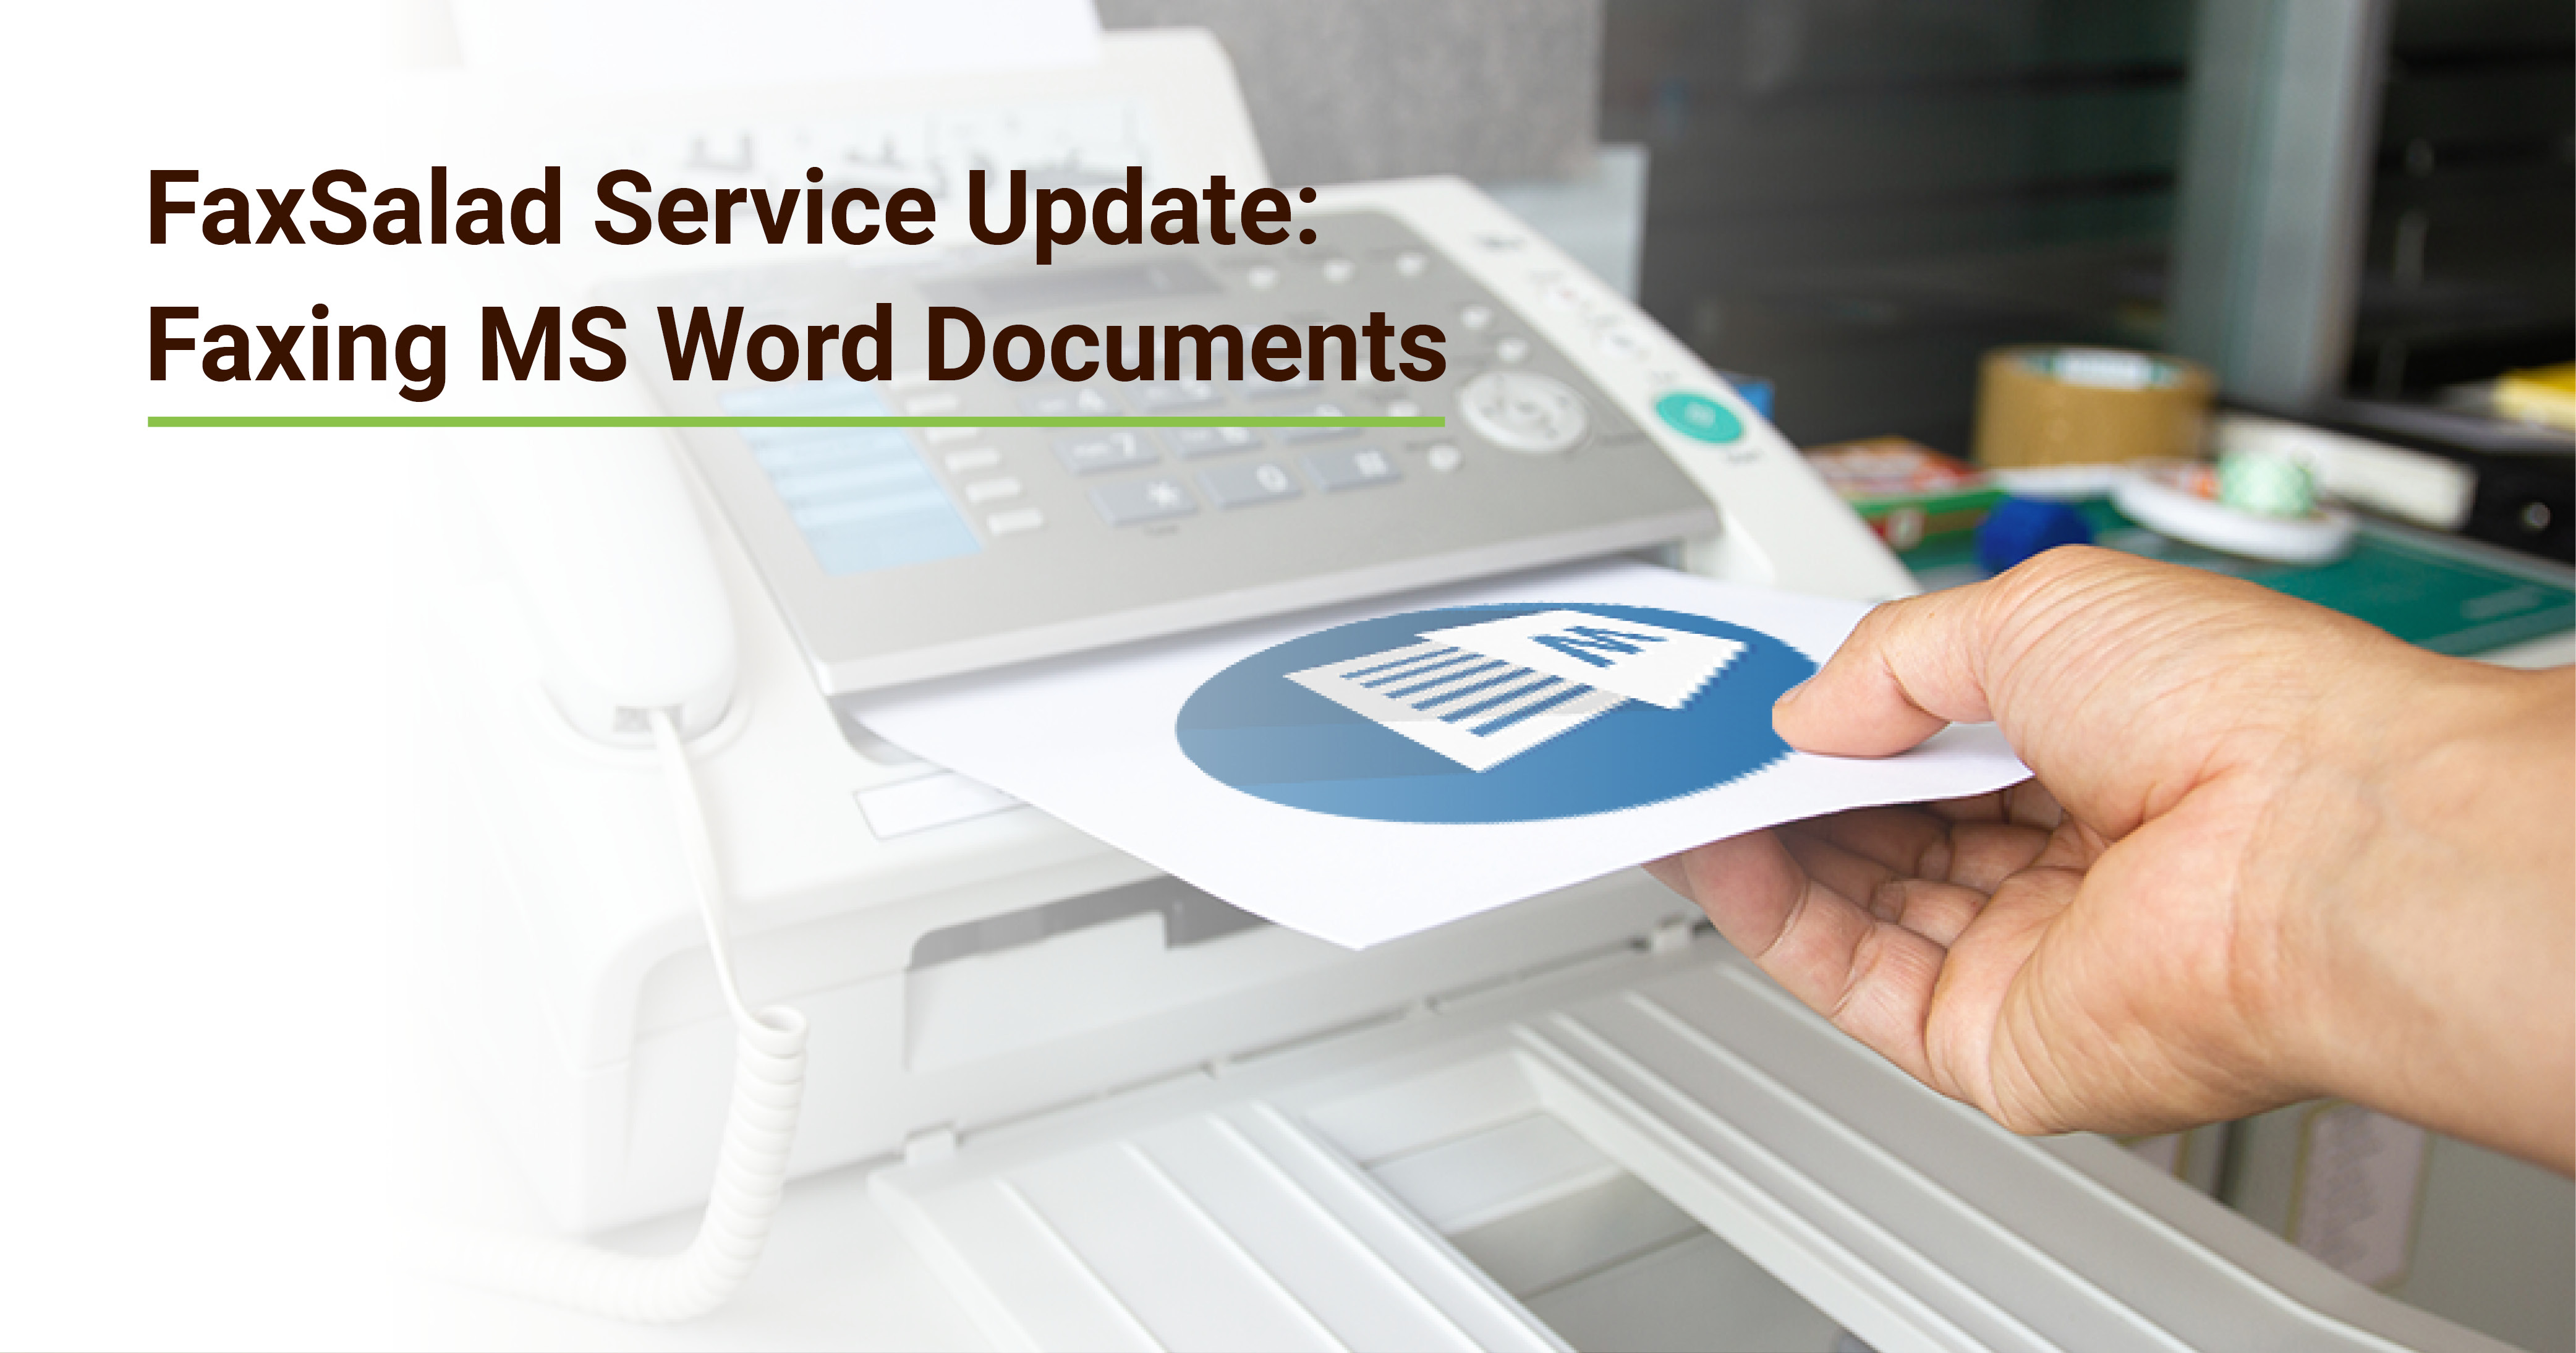 Hand removing a fax from a fax machine with the Microsoft Word logo on it